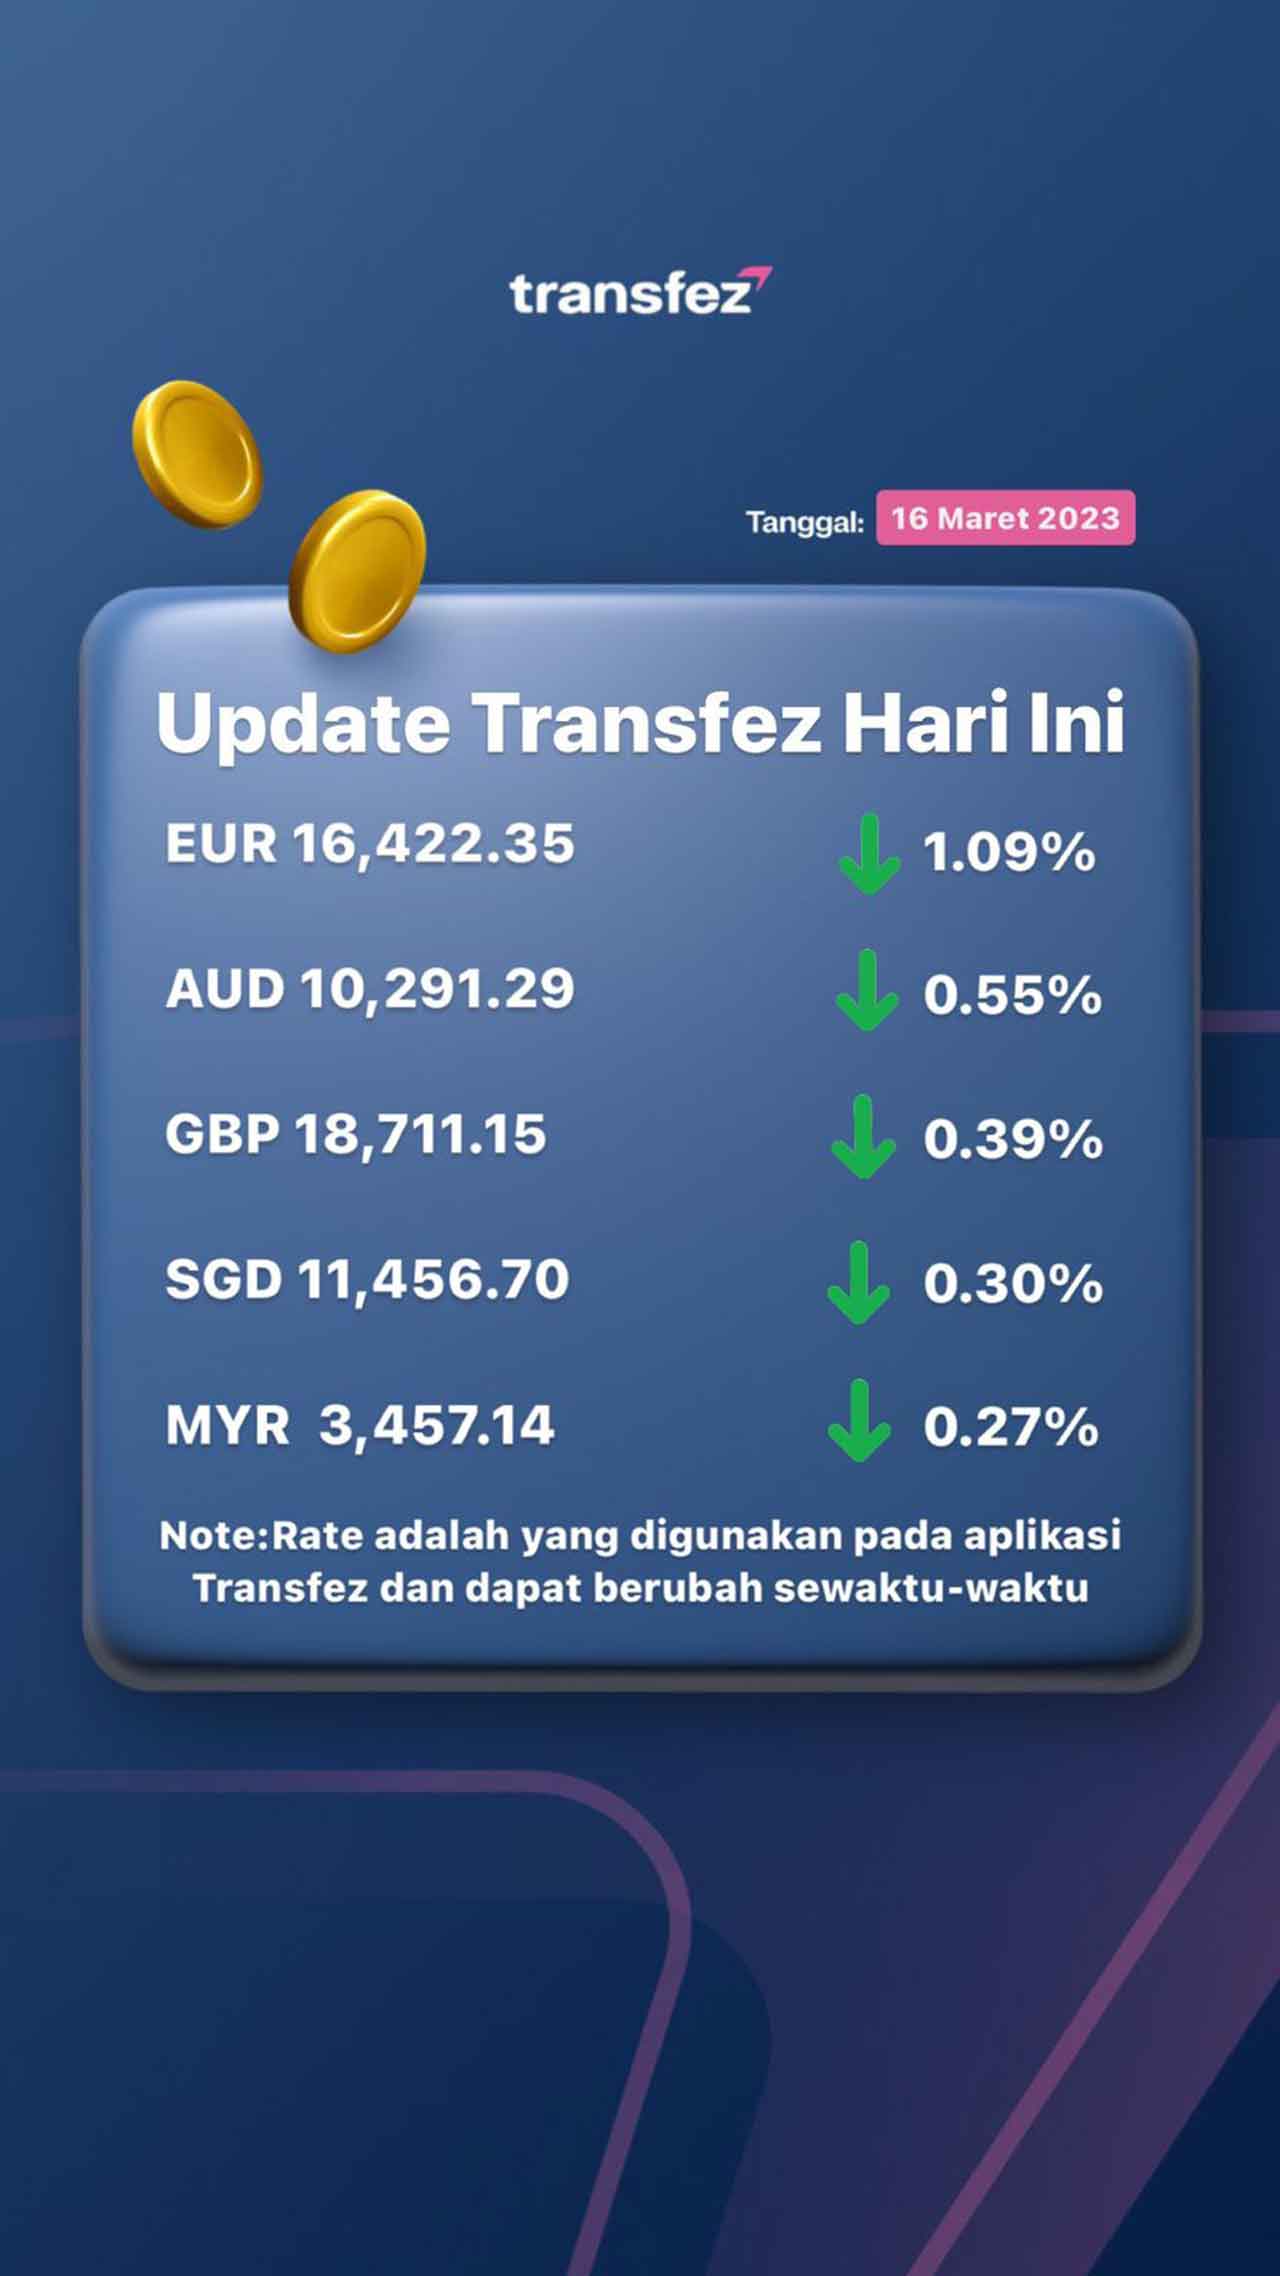 Today's Transfez Rate Update March 16 2023